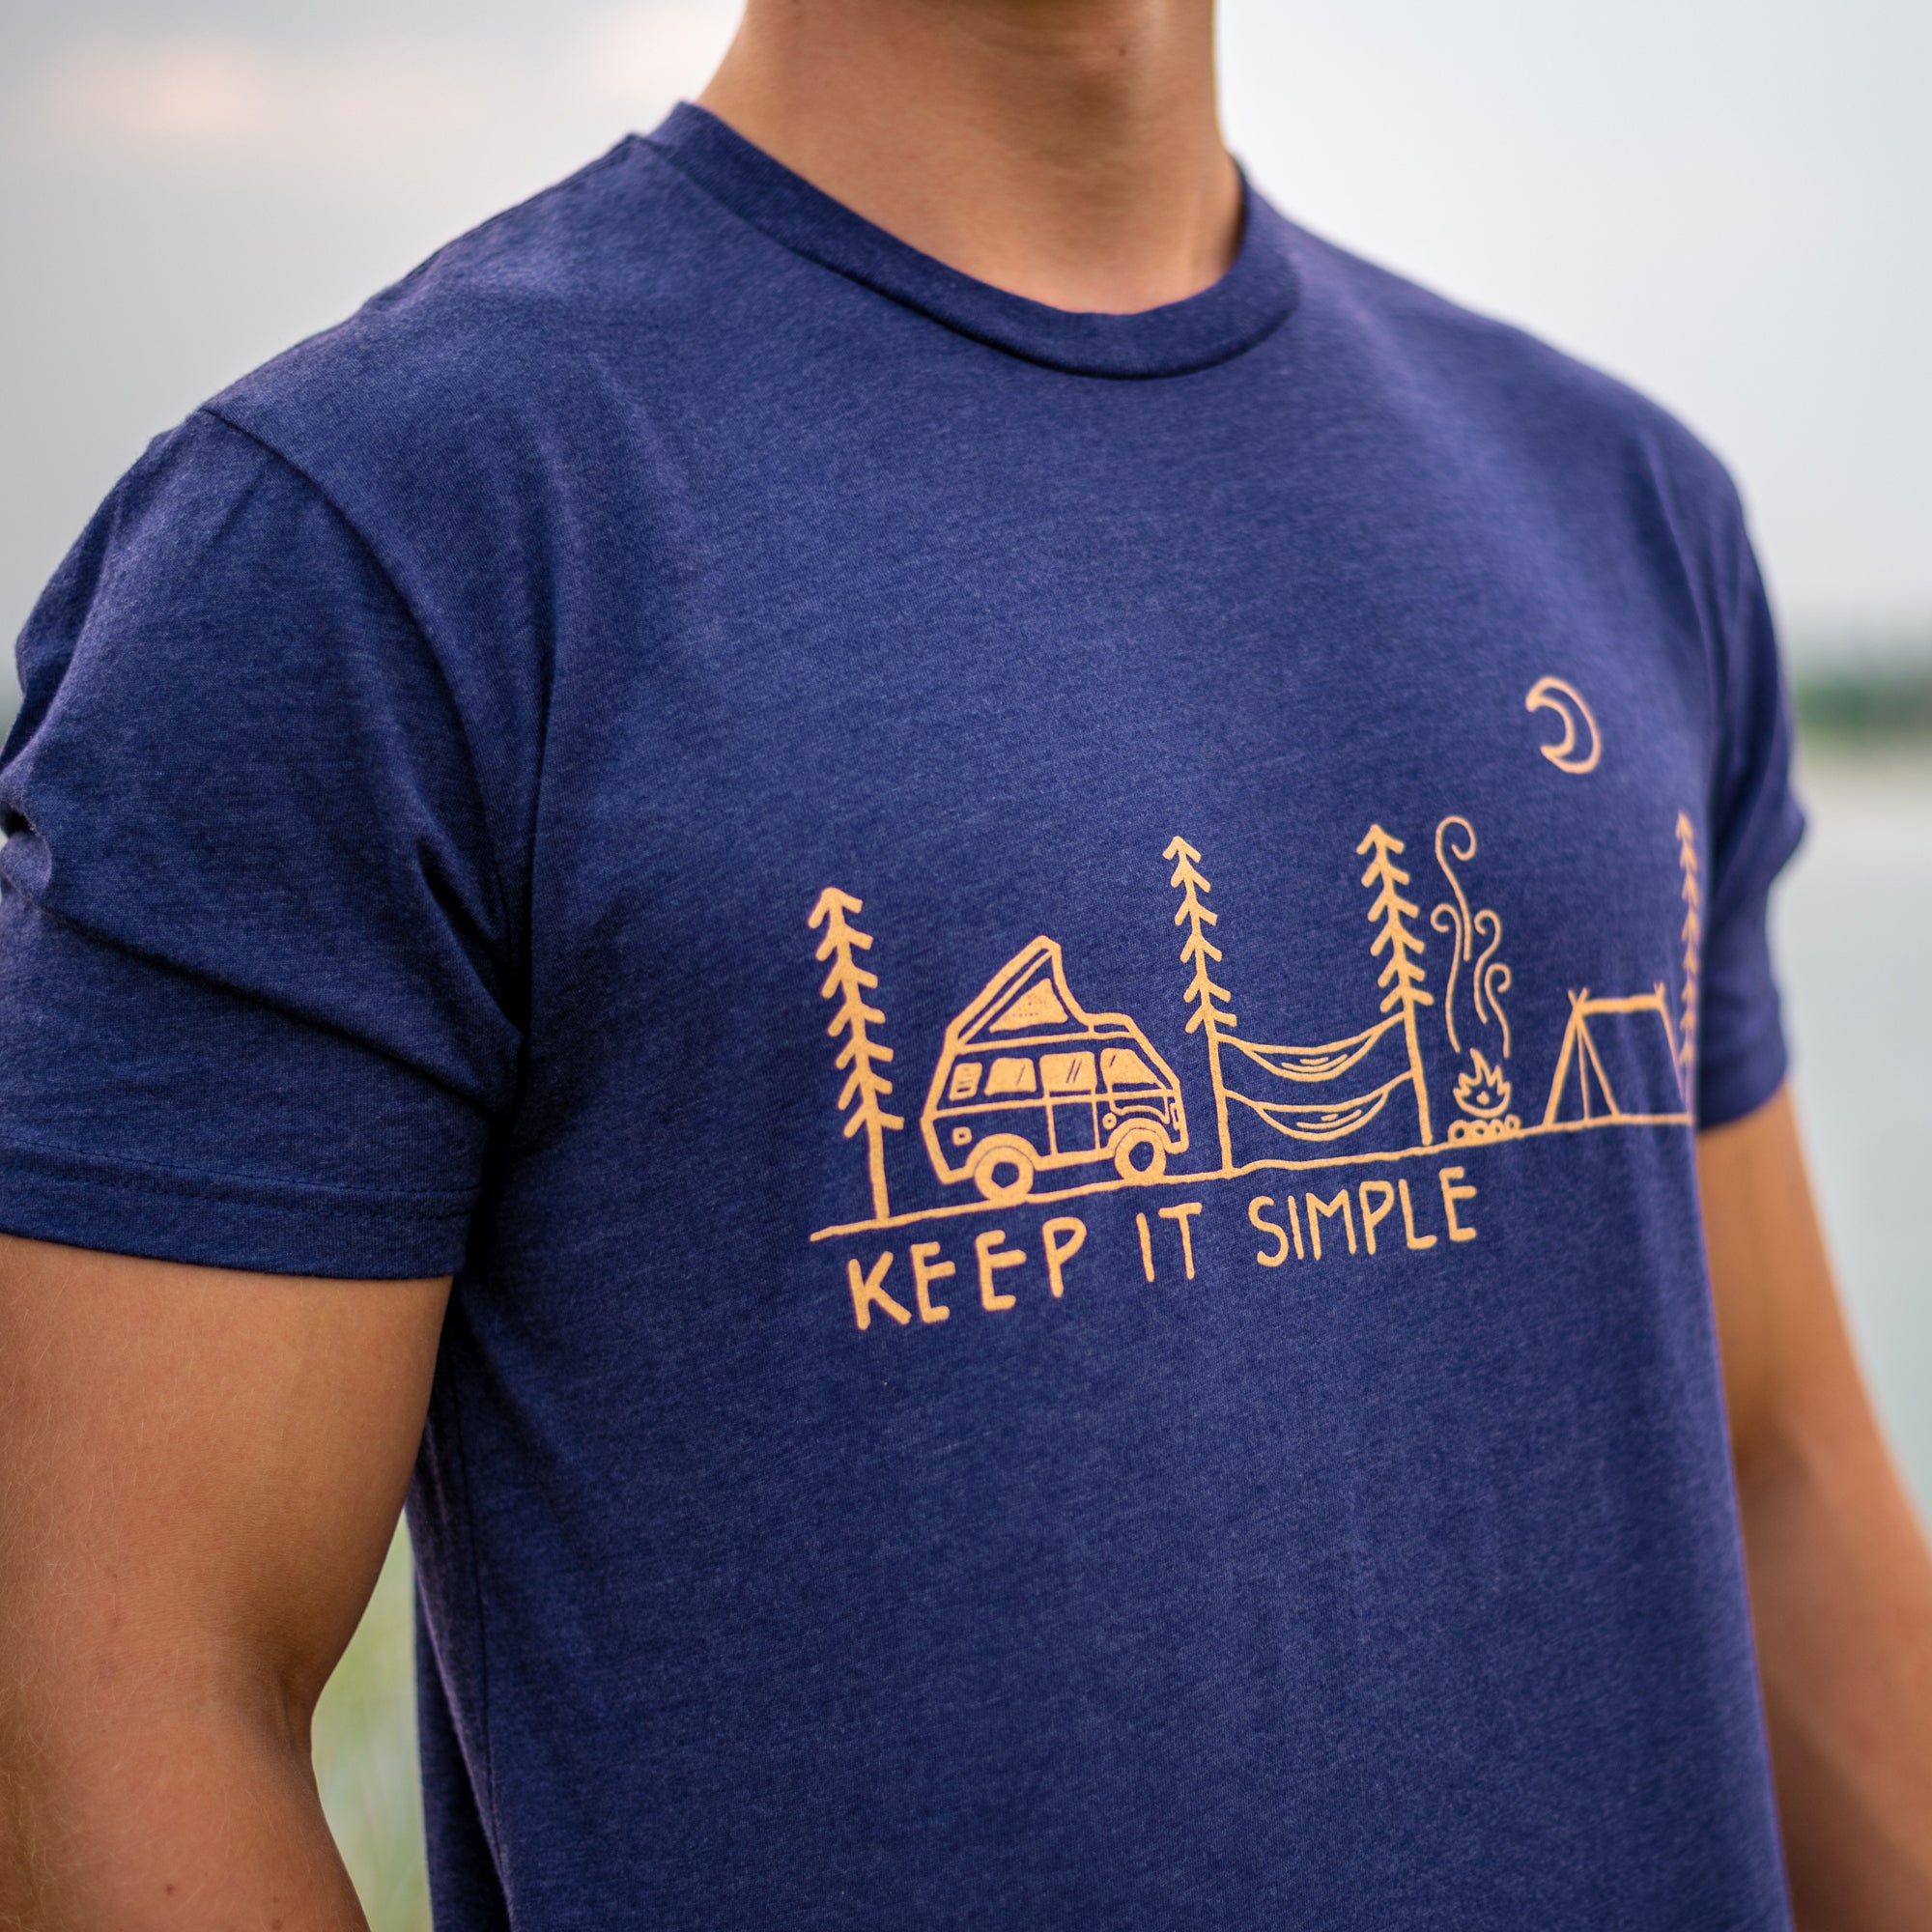 Keep It Simple Motto T-Shirt